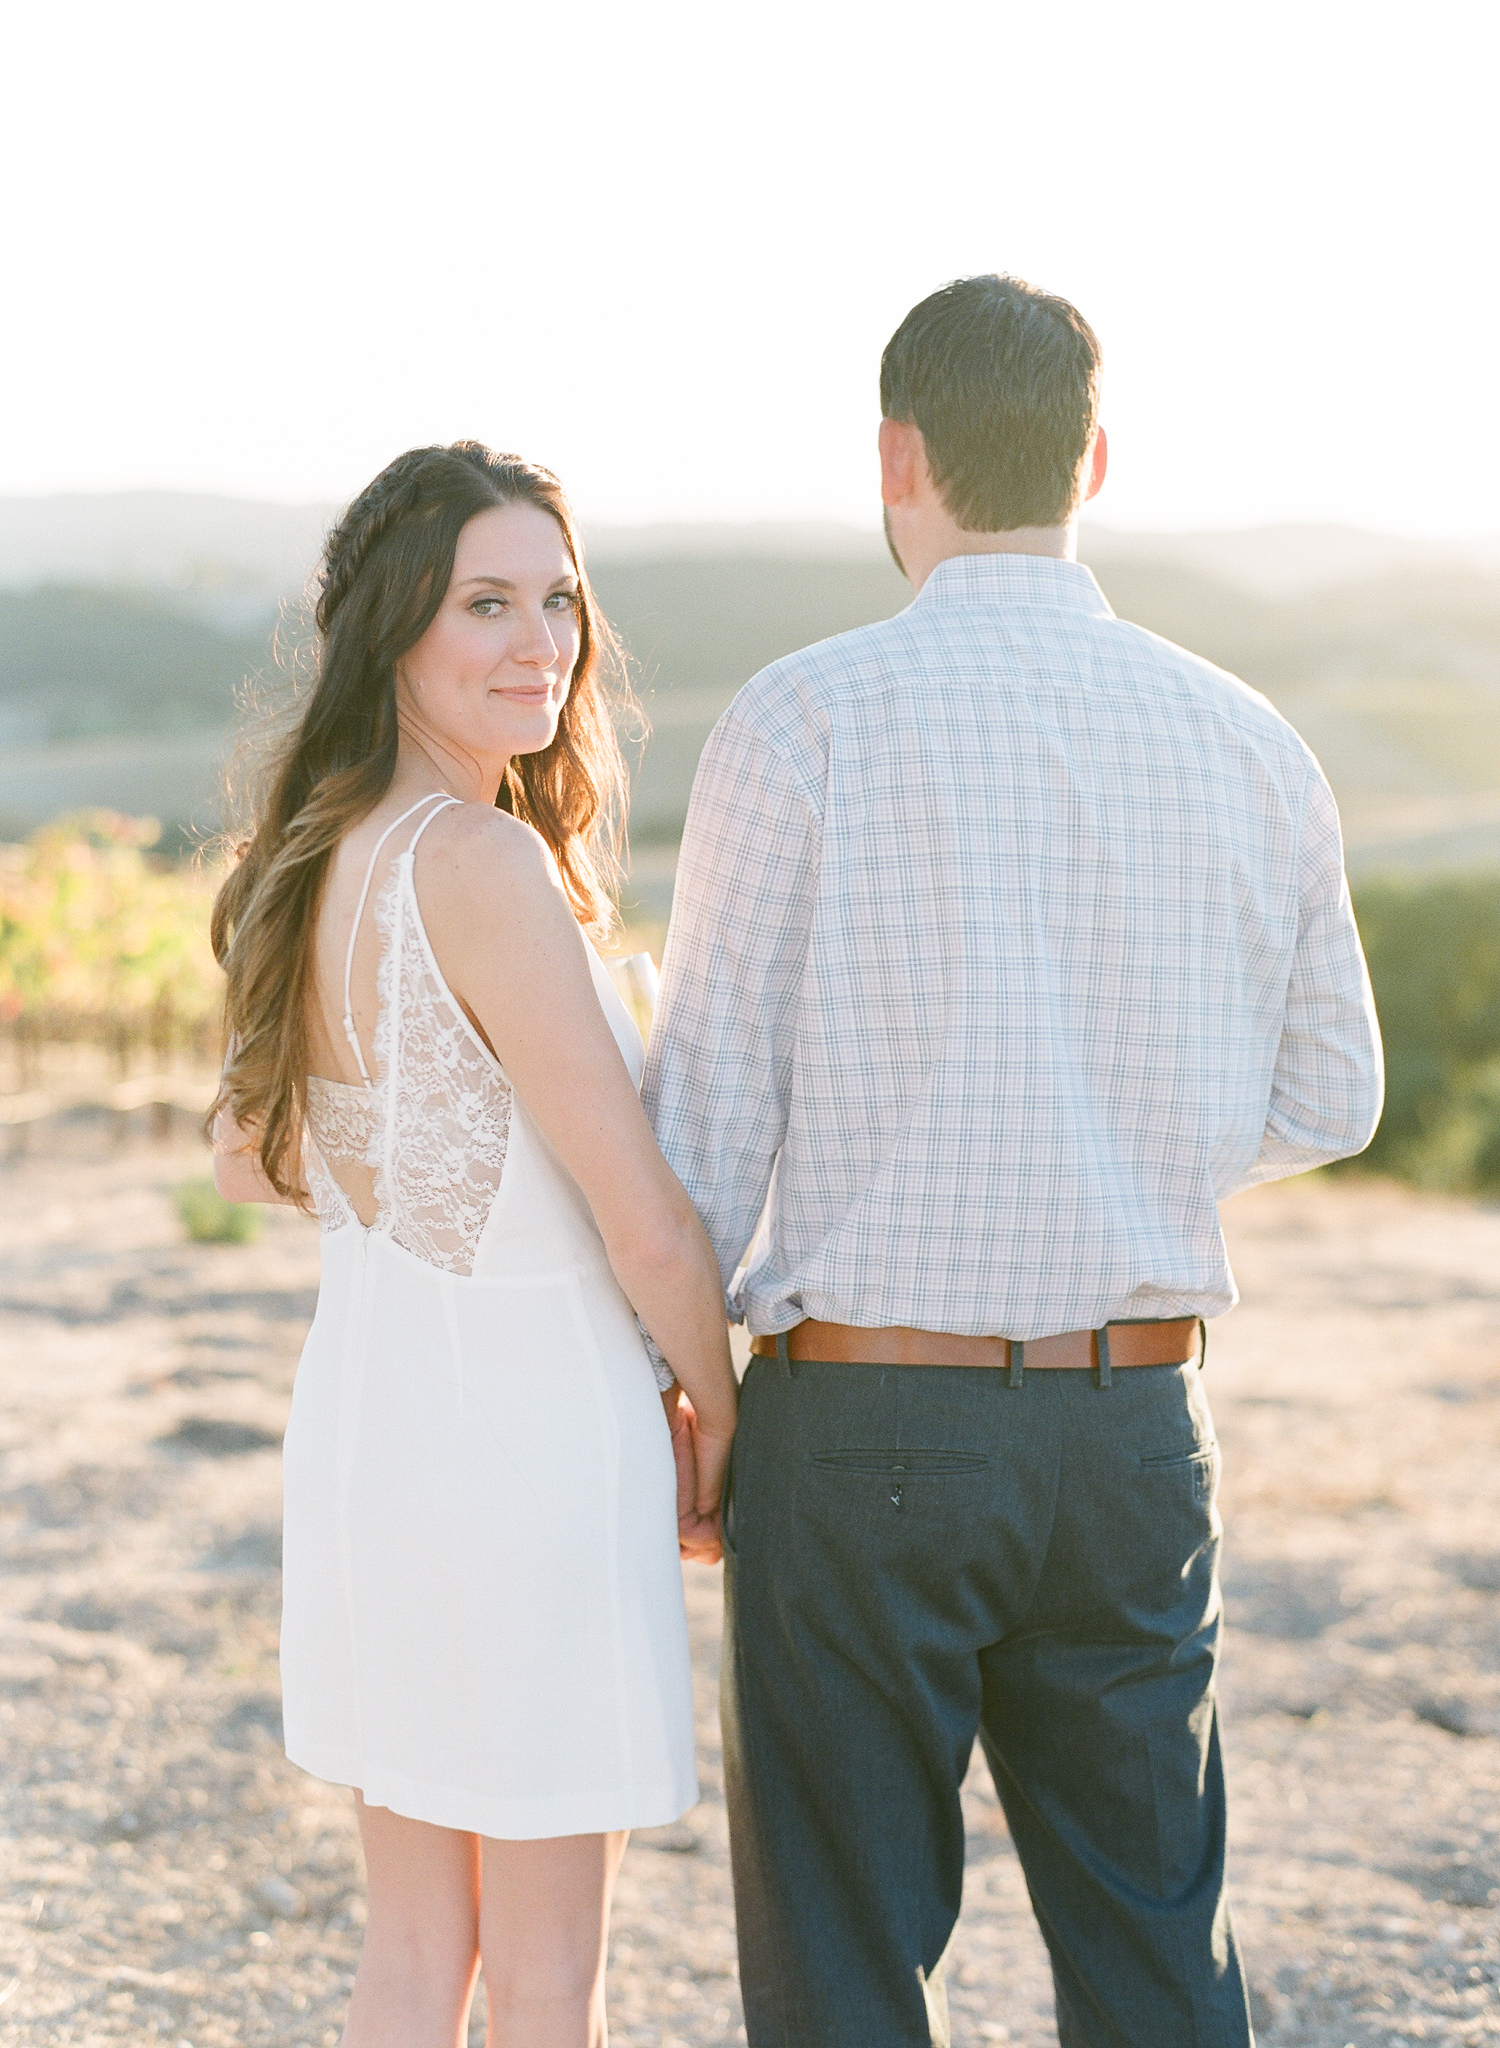 Provence Engagement Photographer | France Engagement Photography | Provence Wedding Photographer | Niner Winery | Paso Robles Engagement Session | Molly Carr Photography